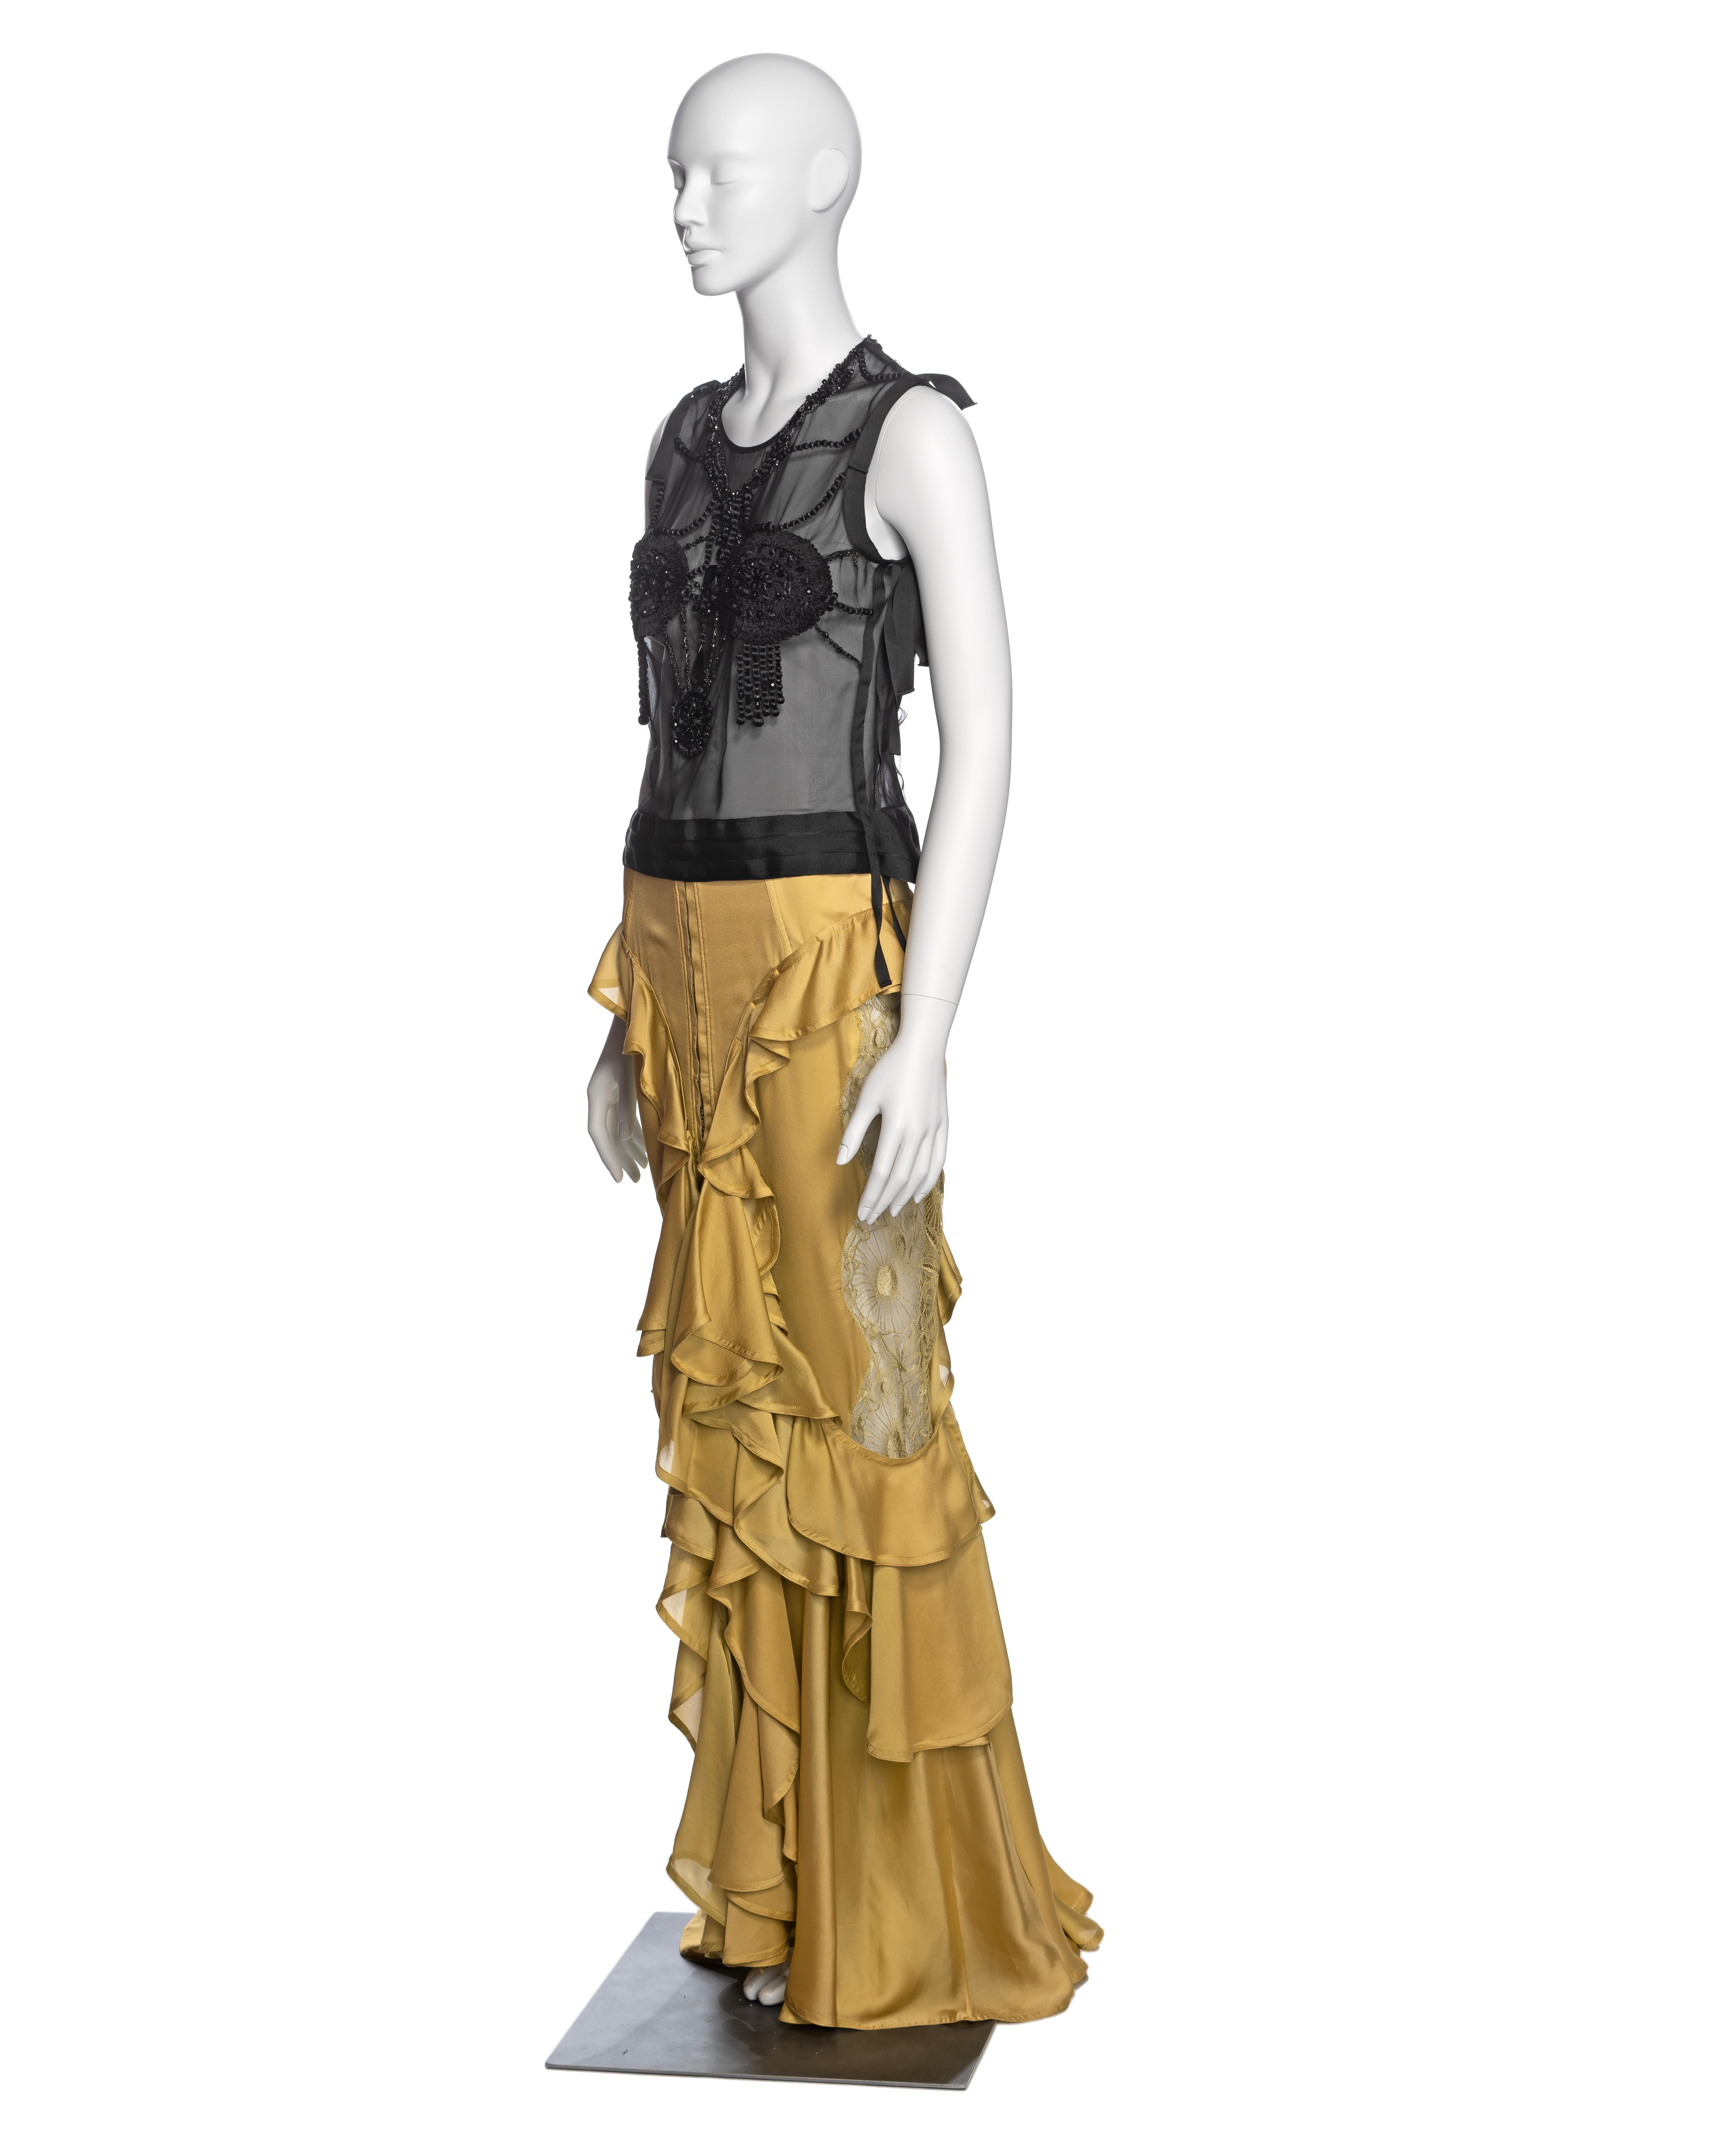 Yves Saint Laurent by Tom Ford Embellished Top and Silk Skirt Ensemble, FW 2003 10